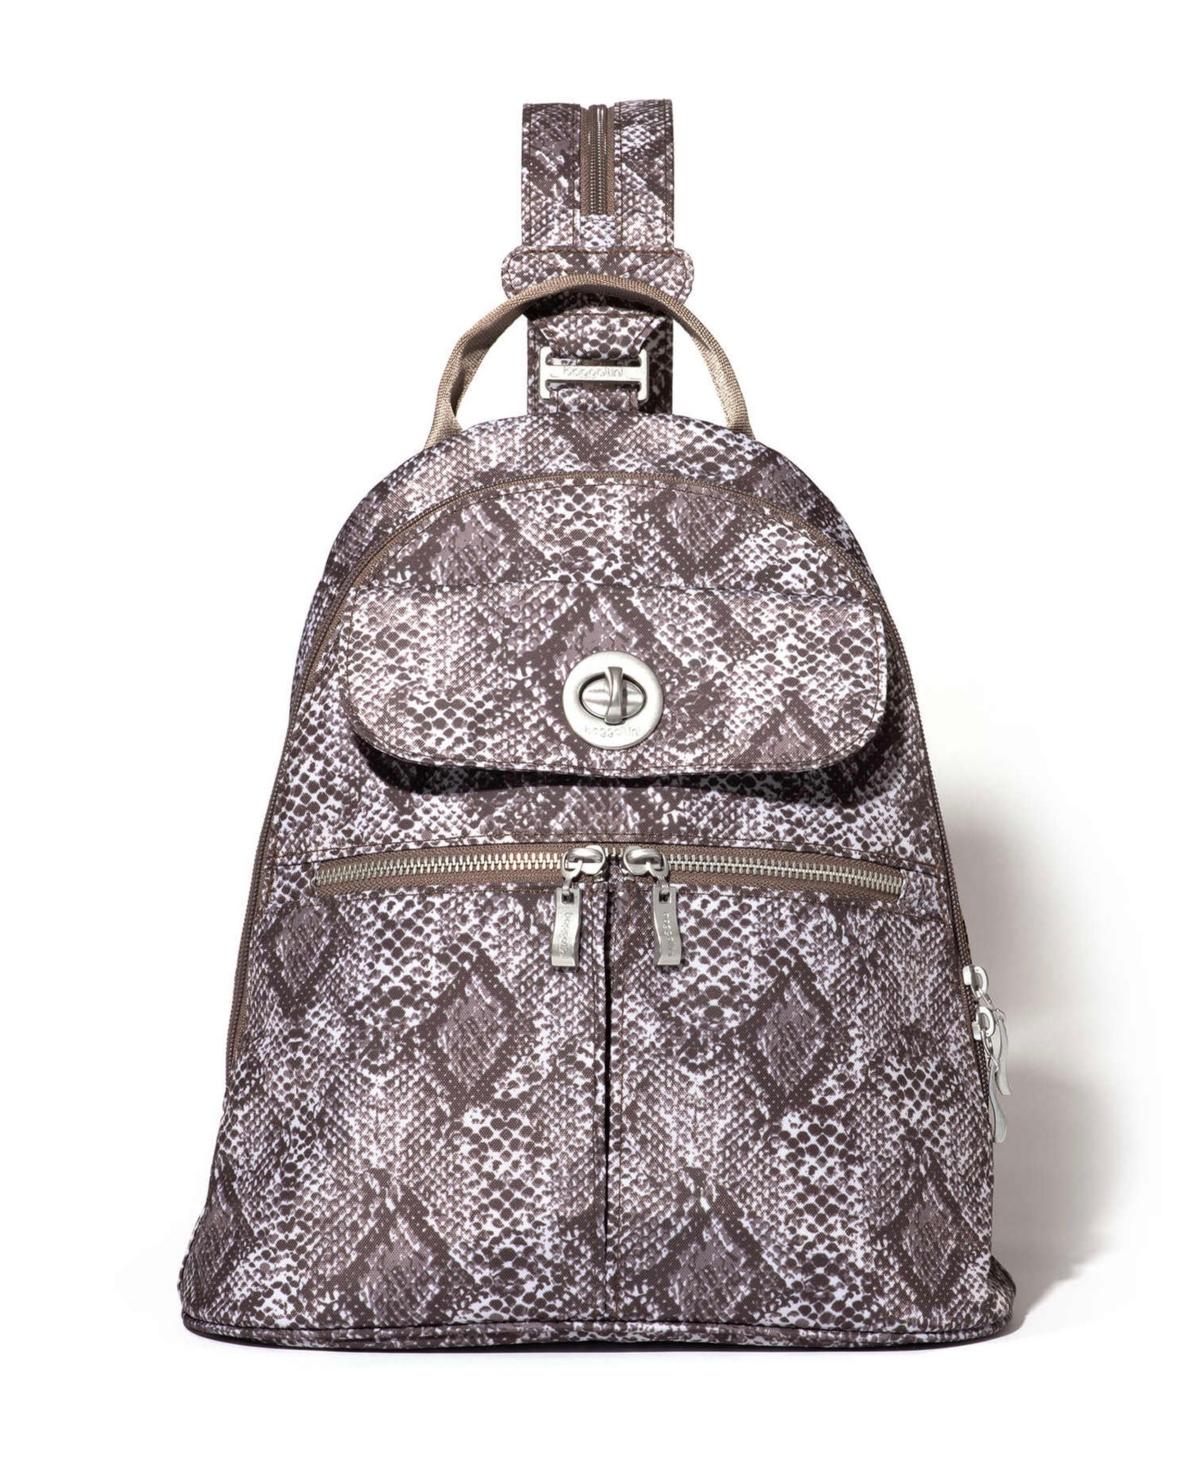 Baggallini Naples Convertible Backpack In Tan Python